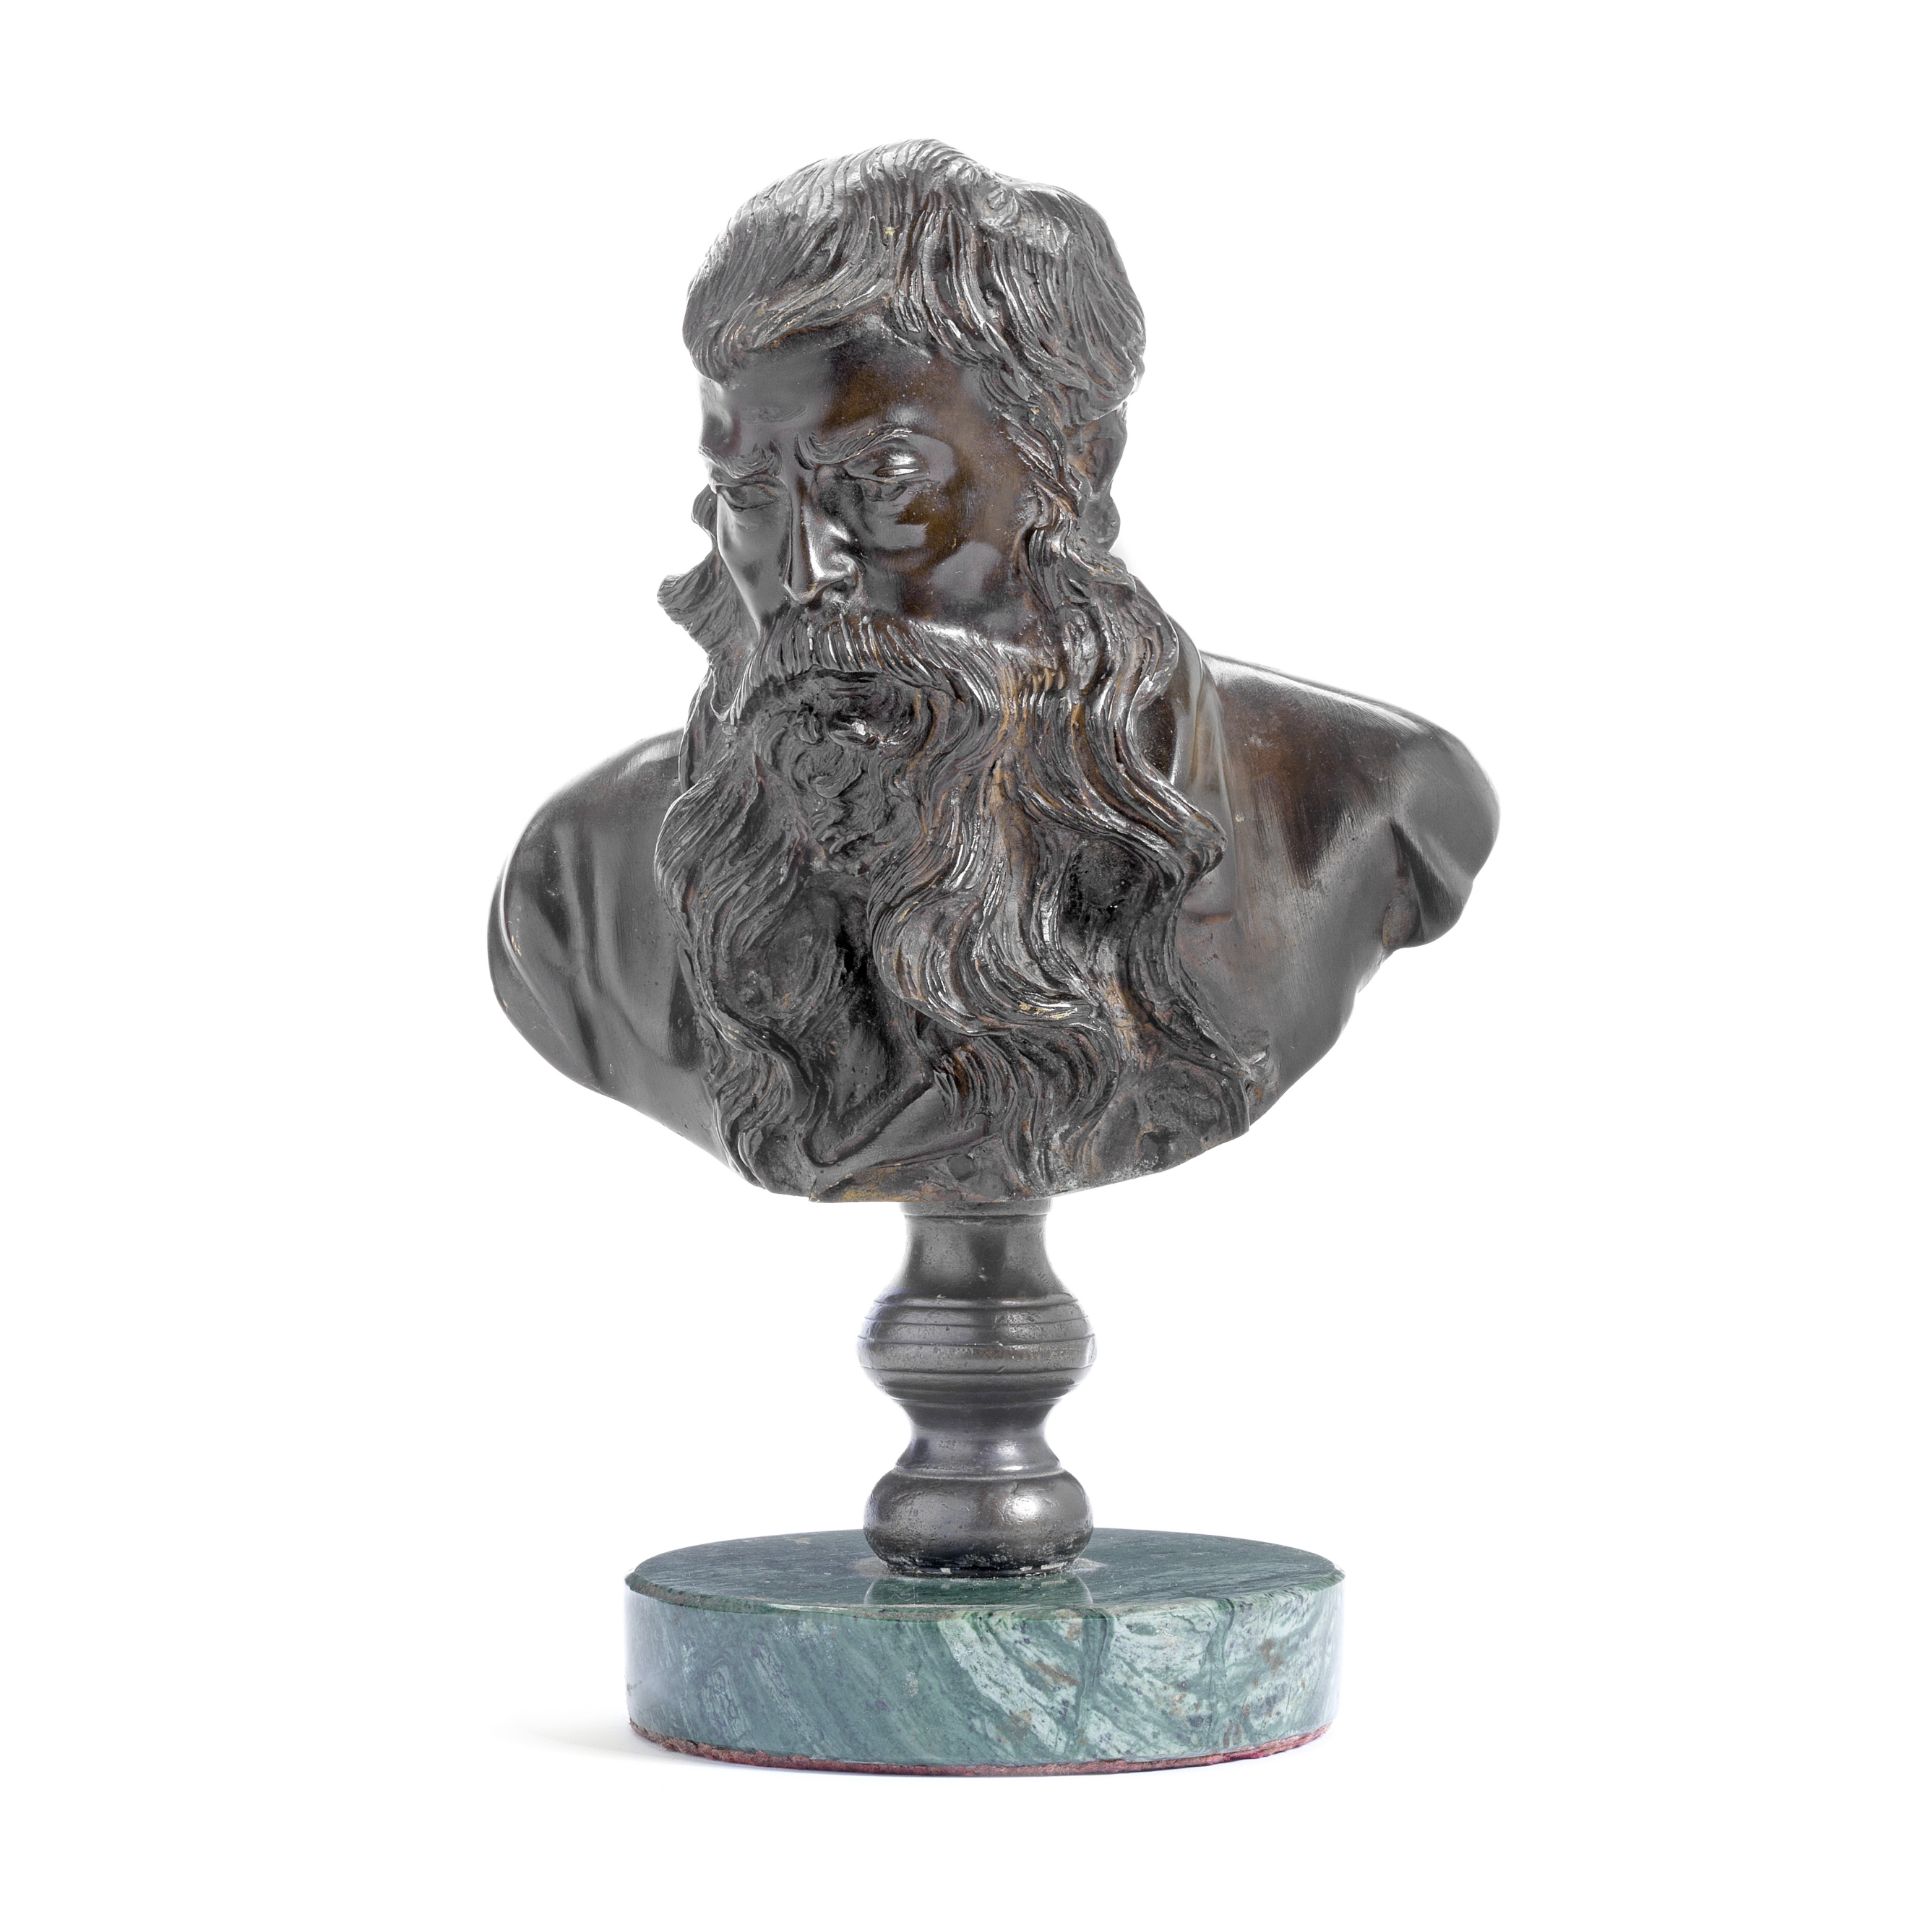 After Vincenzo Gemito, (Italian, 1852-1929): A patinated bronze bust of Messonier